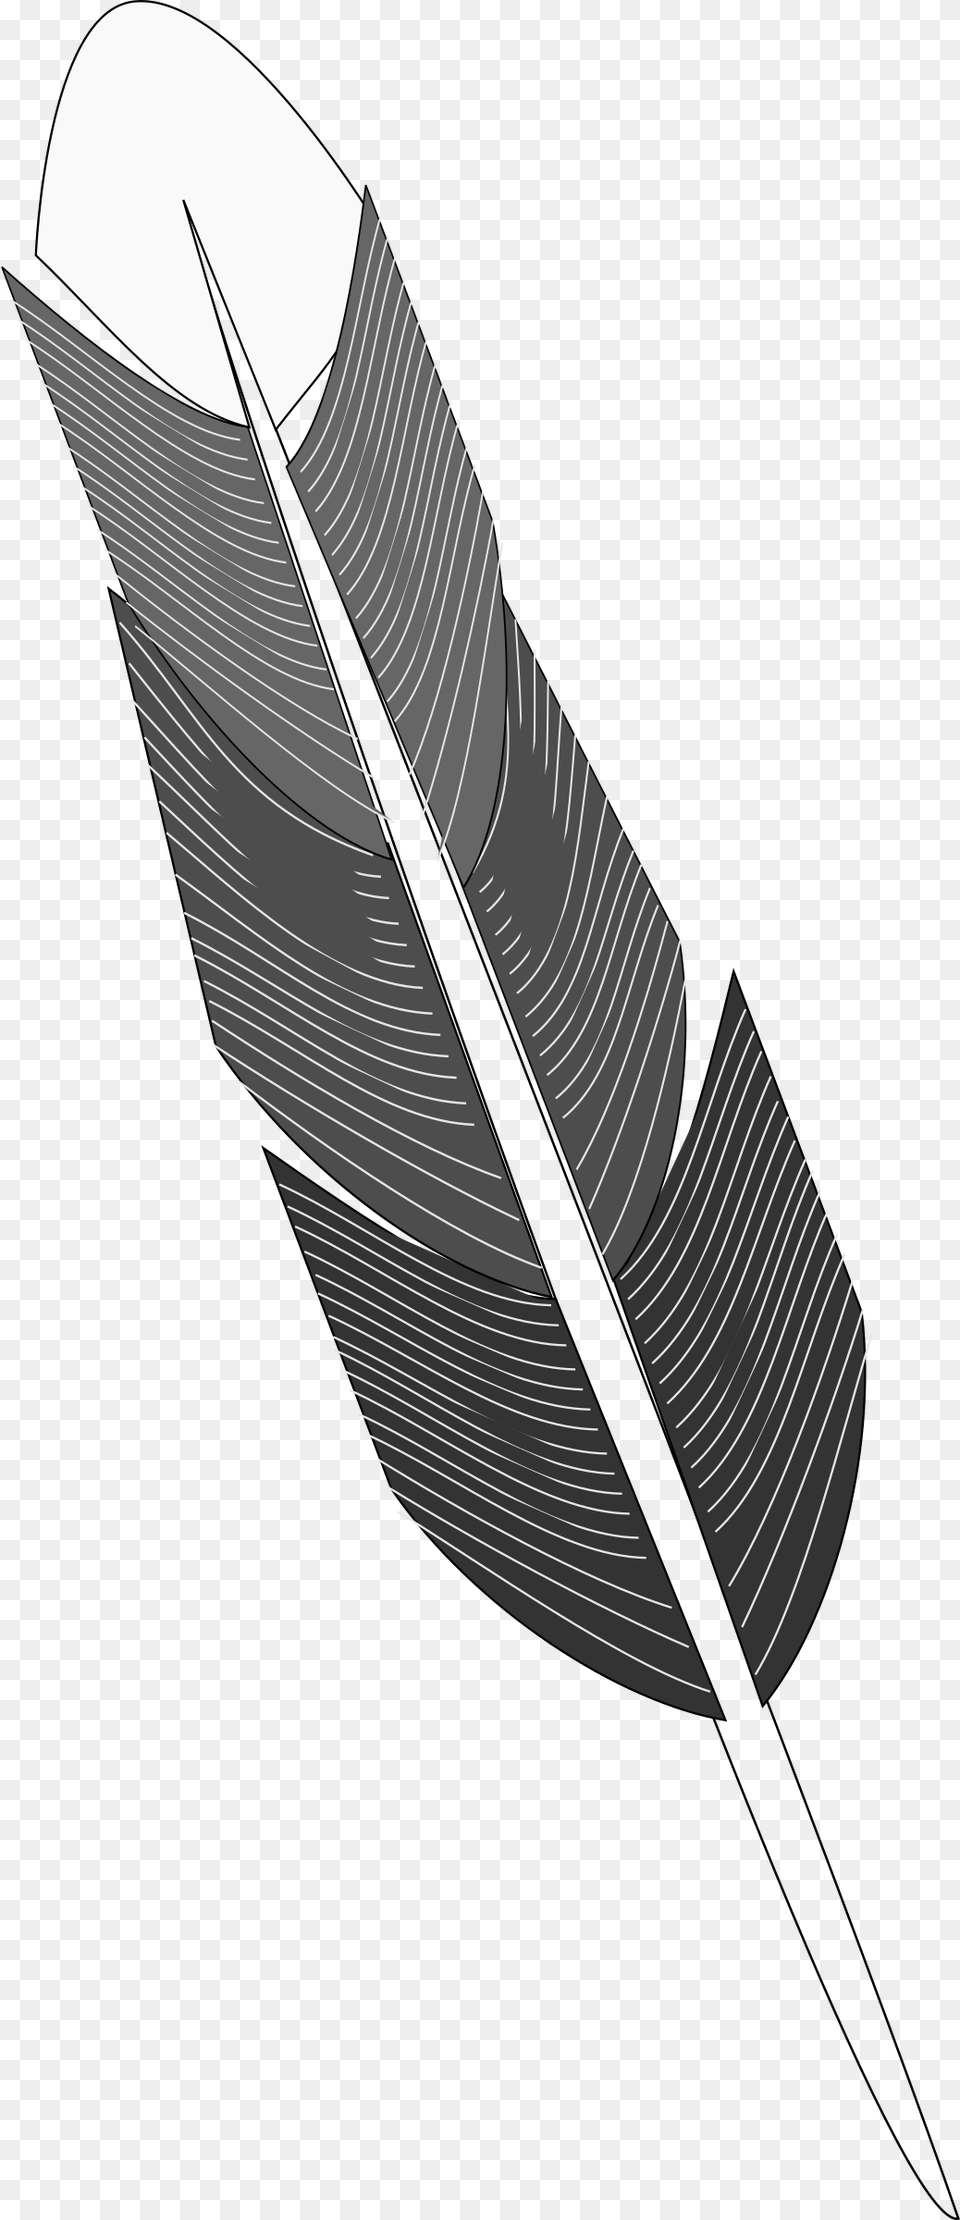 Grayscale Feather Clip Arts Grayscale Feather, Accessories, Bottle, Formal Wear, Tie Free Png Download